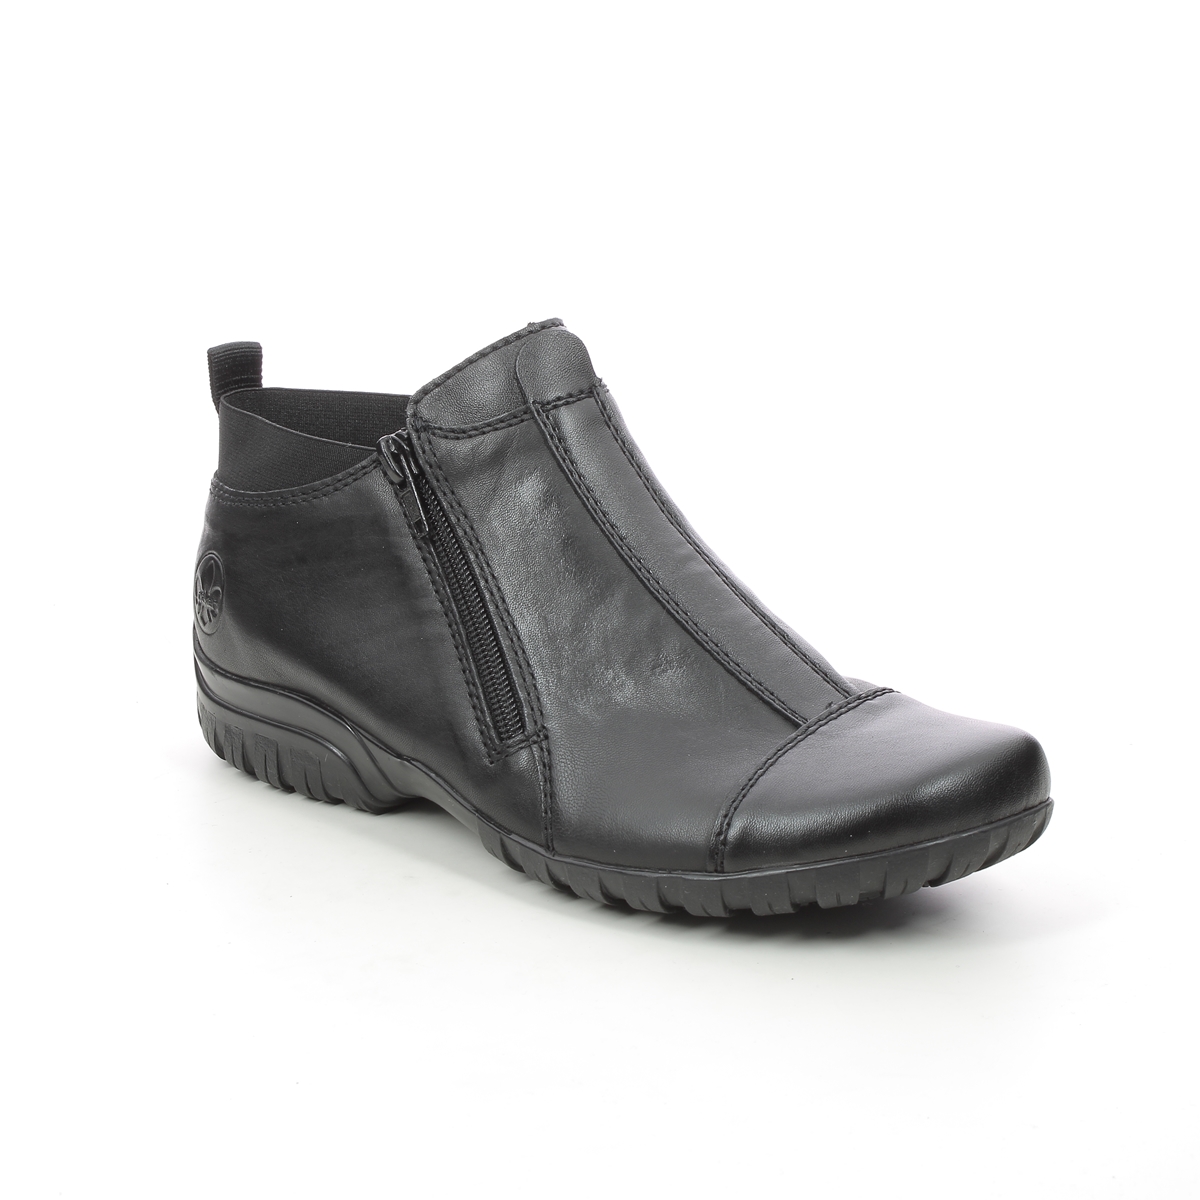 Rieker Birbocap 15 Black Leather Womens Ankle Boots L4653-00 In Size 41 In Plain Black Leather